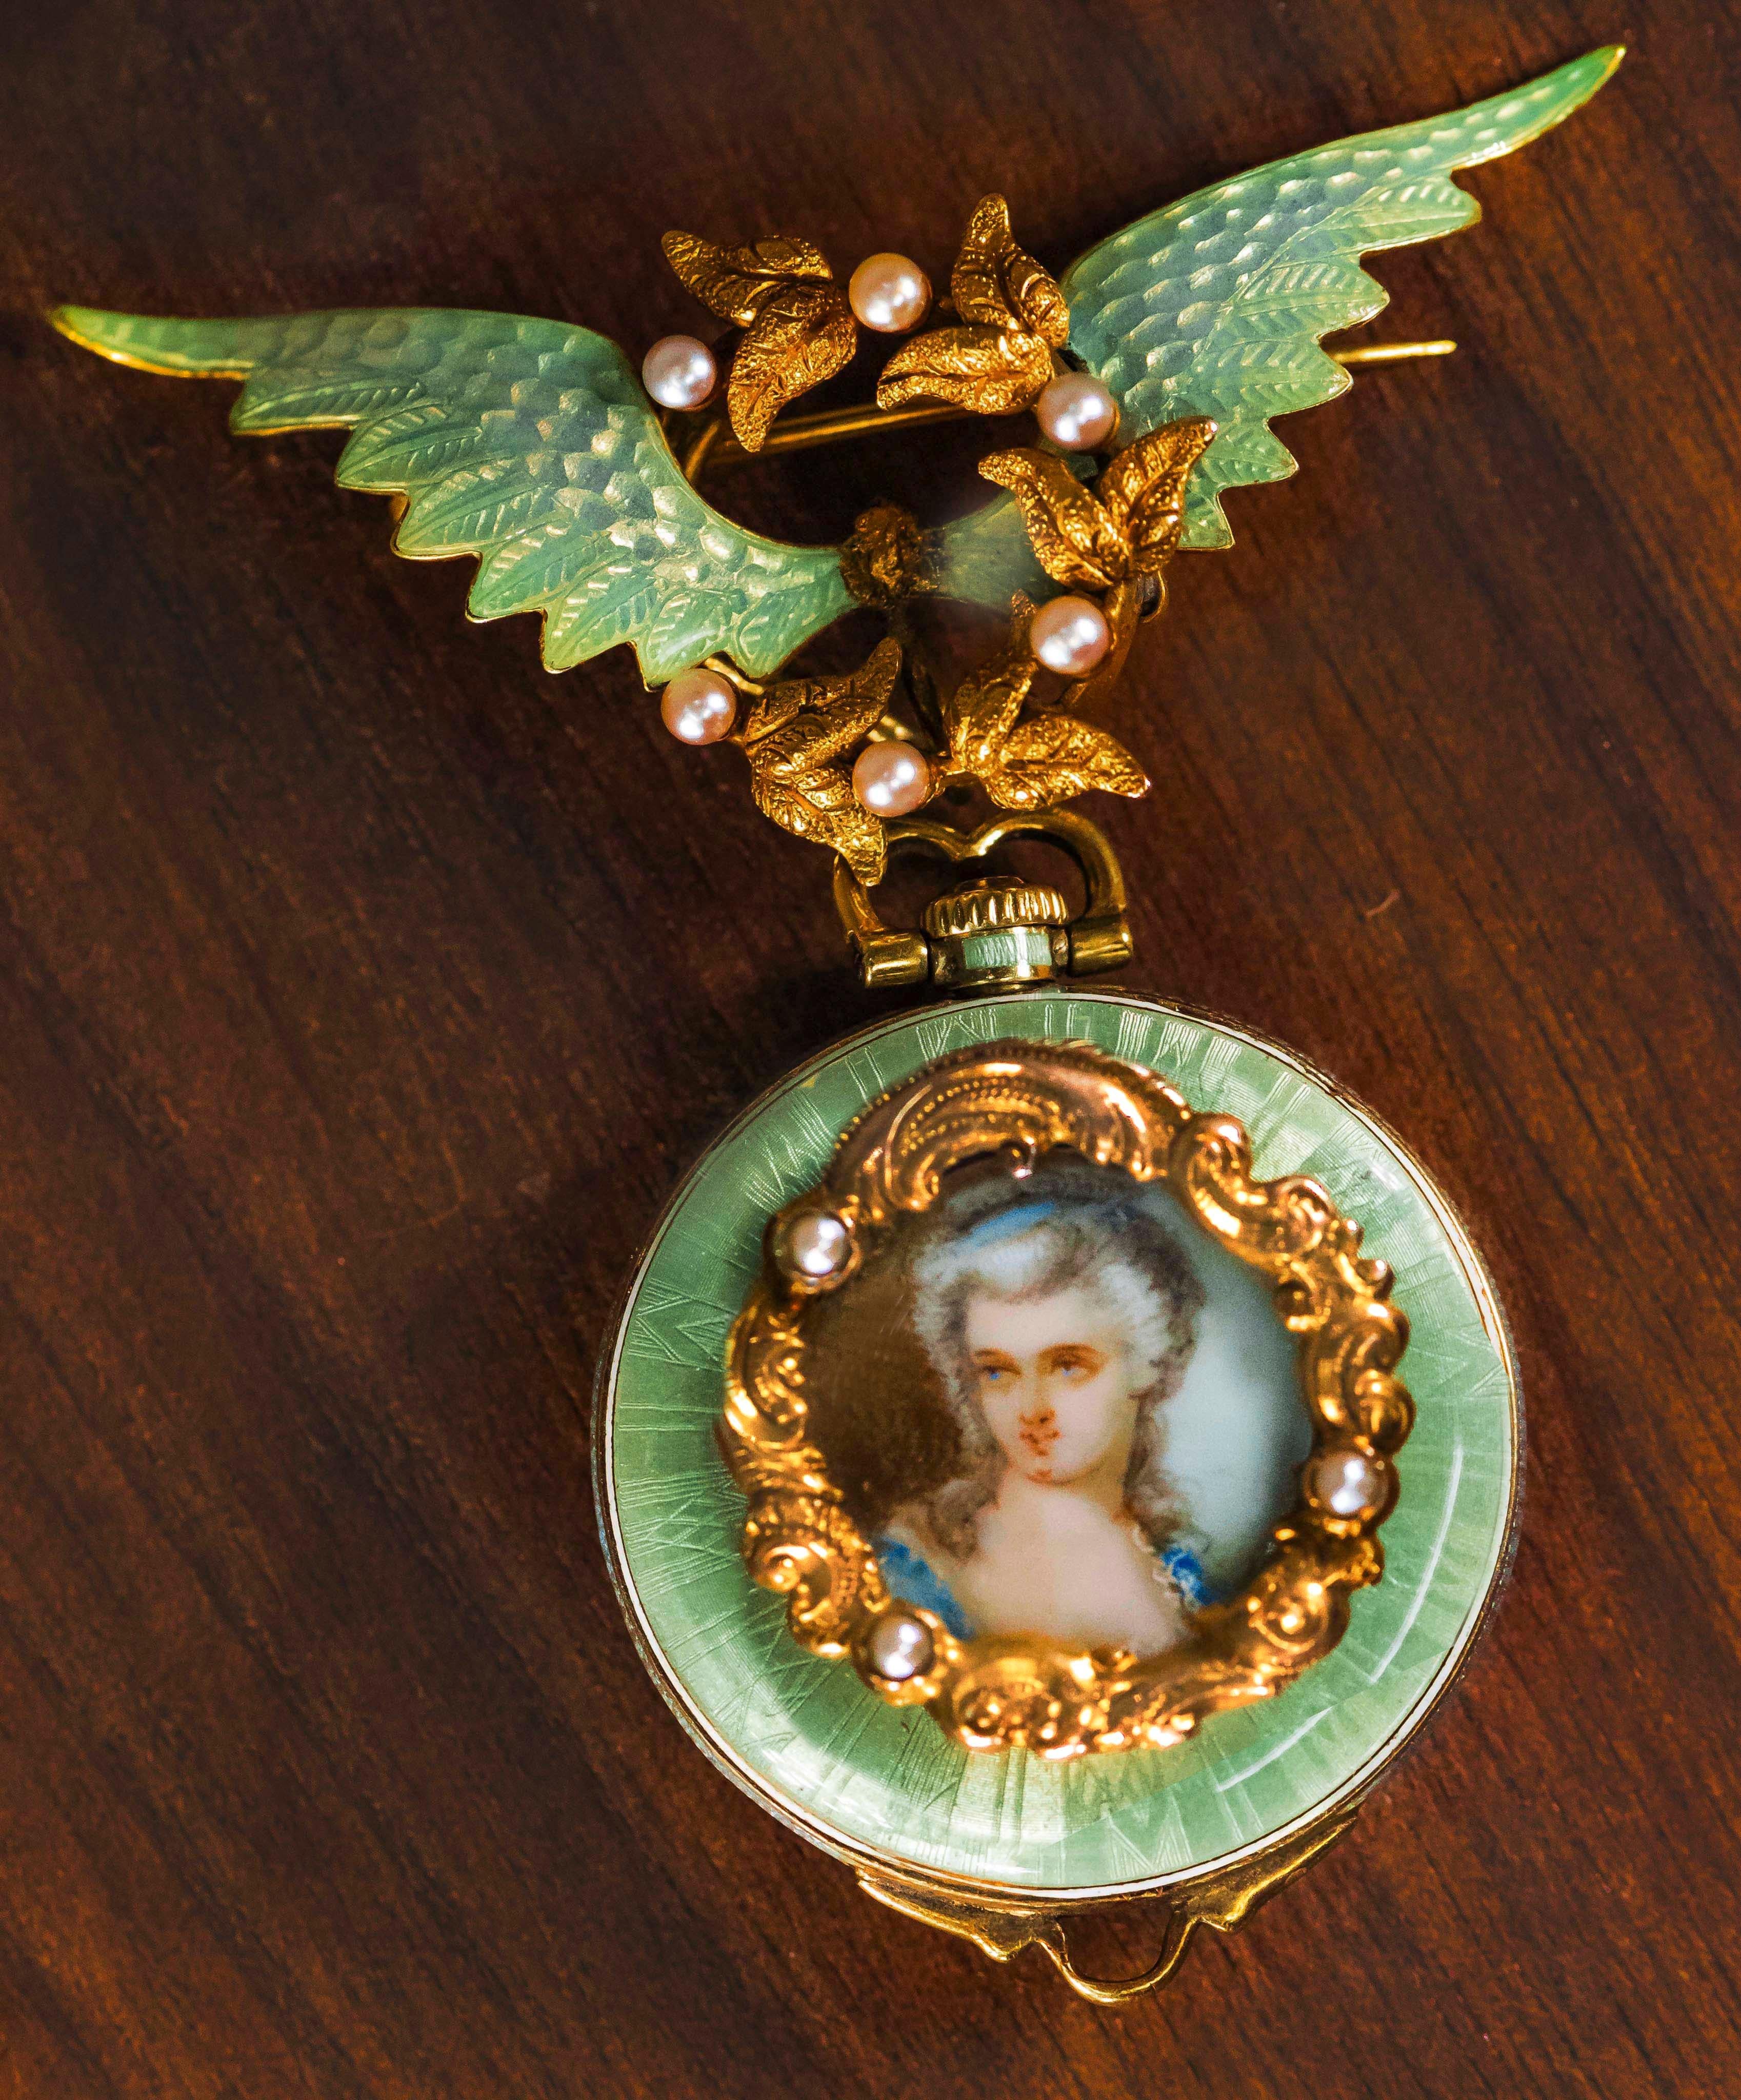 An Impressive & Extremely Well-Made Art Nouveau 1840s-1860s, Iridescent Enamel Angel Winged Pearl Set Flower Wreath Pendant Watch with matching
Blueish Green Enamel Portrait of French Bourgeois woman  

Basic Specifications & Special Features  